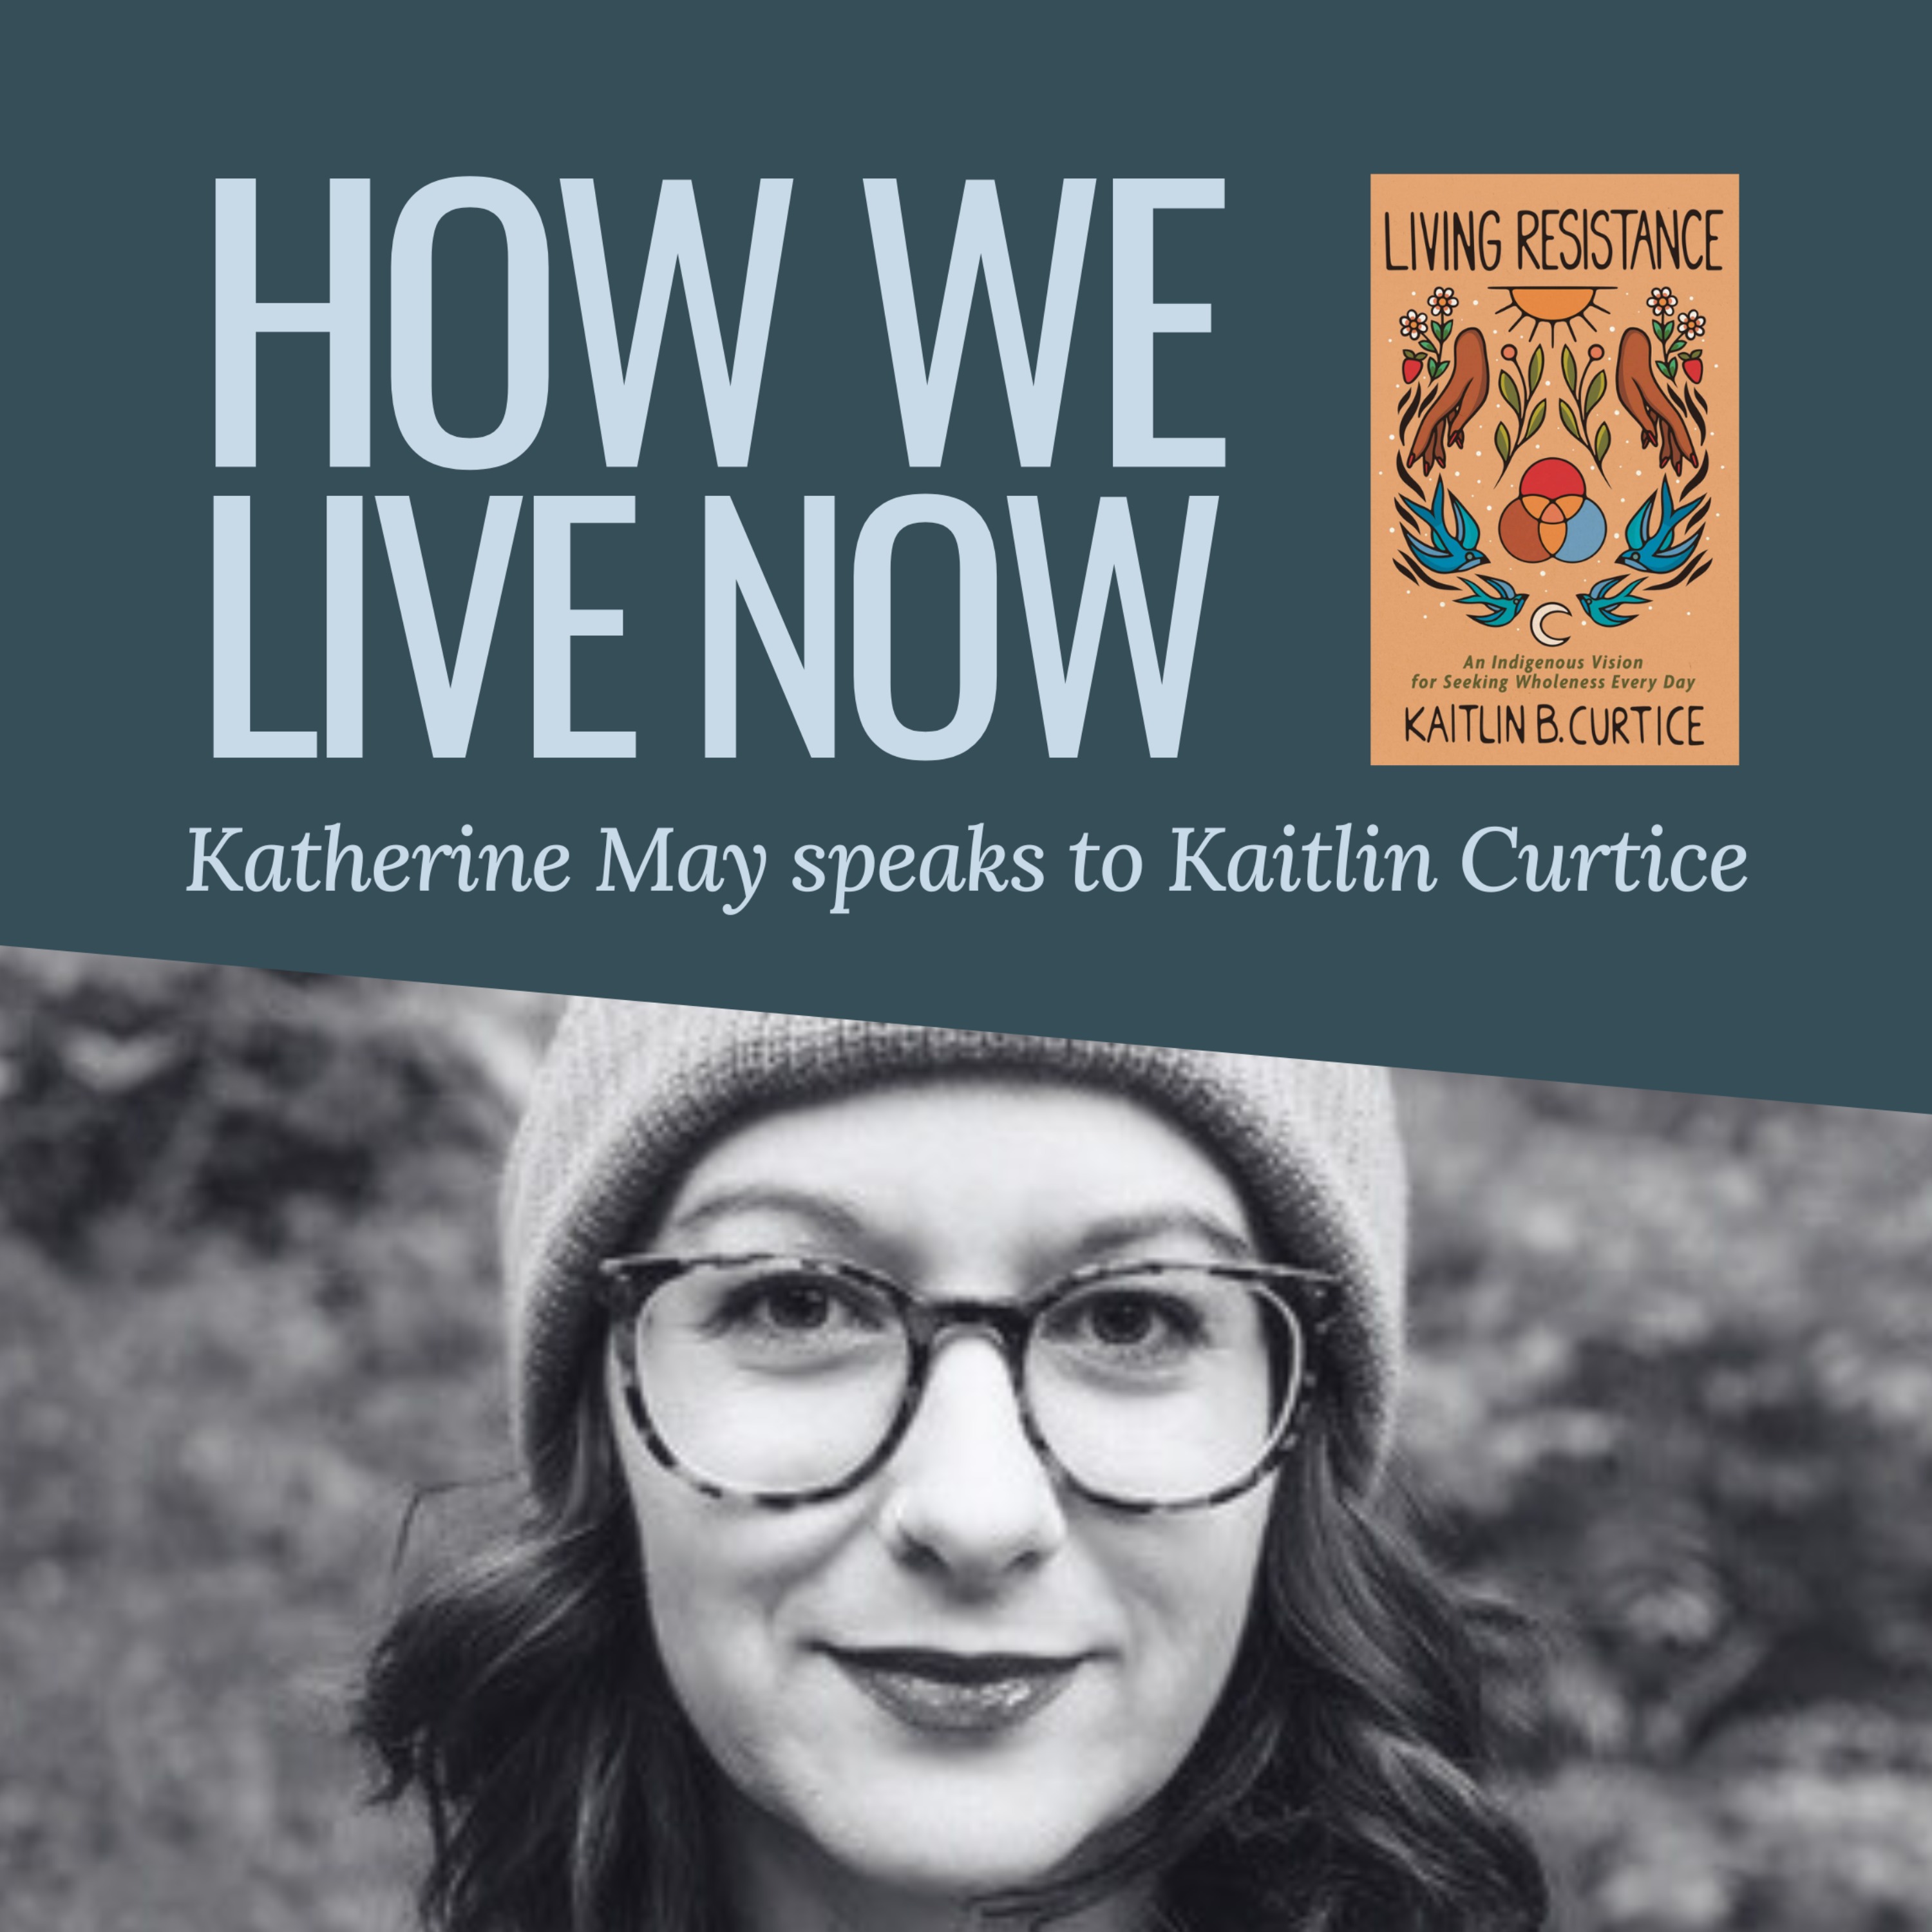 Kaitlin Curtice on resisting with integrity